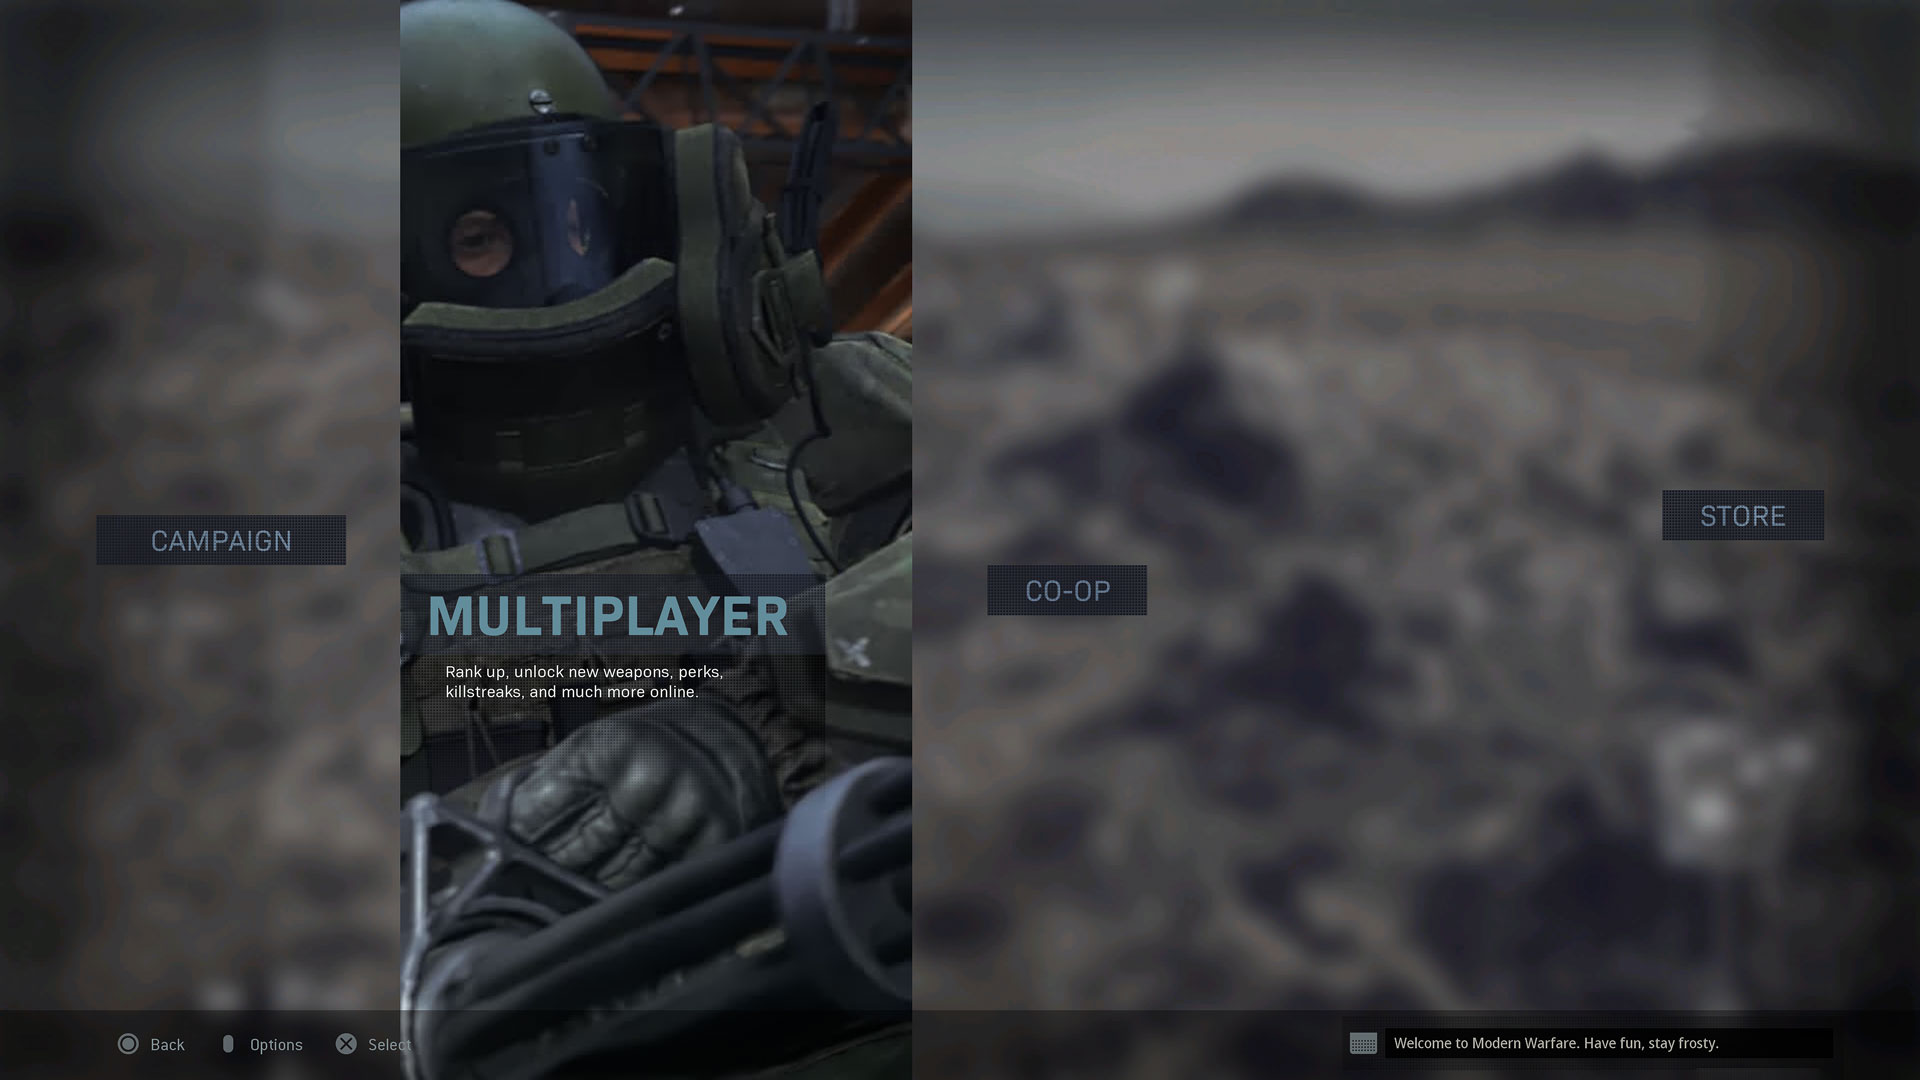 call of duty modern warfare multiplayer not available until full download